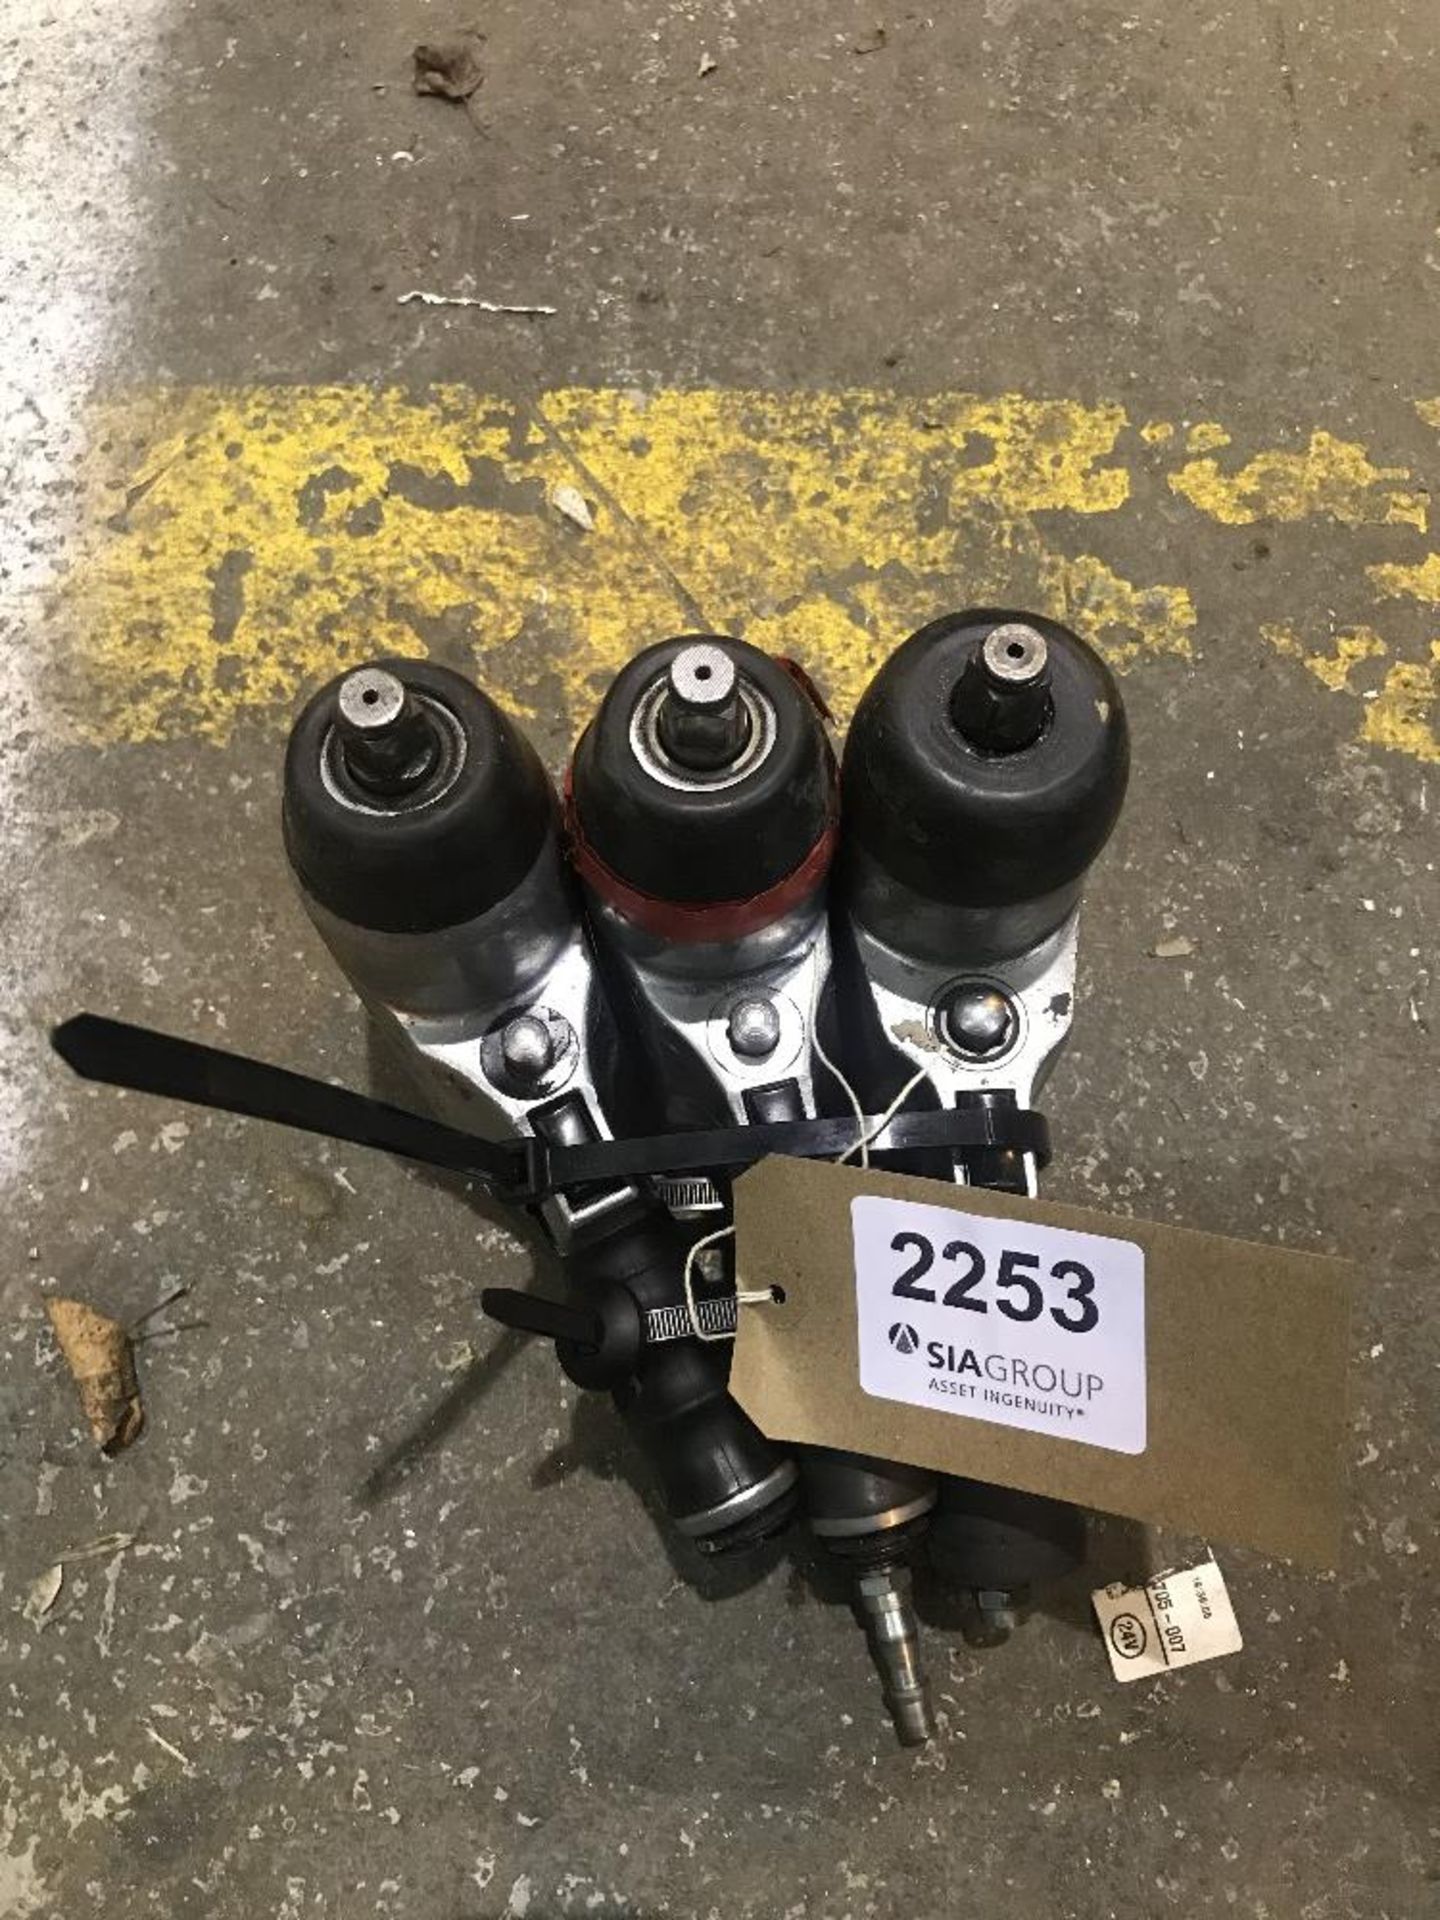 (3) Pneumatic Impact Wrenches - Chicago Pneumatic & Unbranded